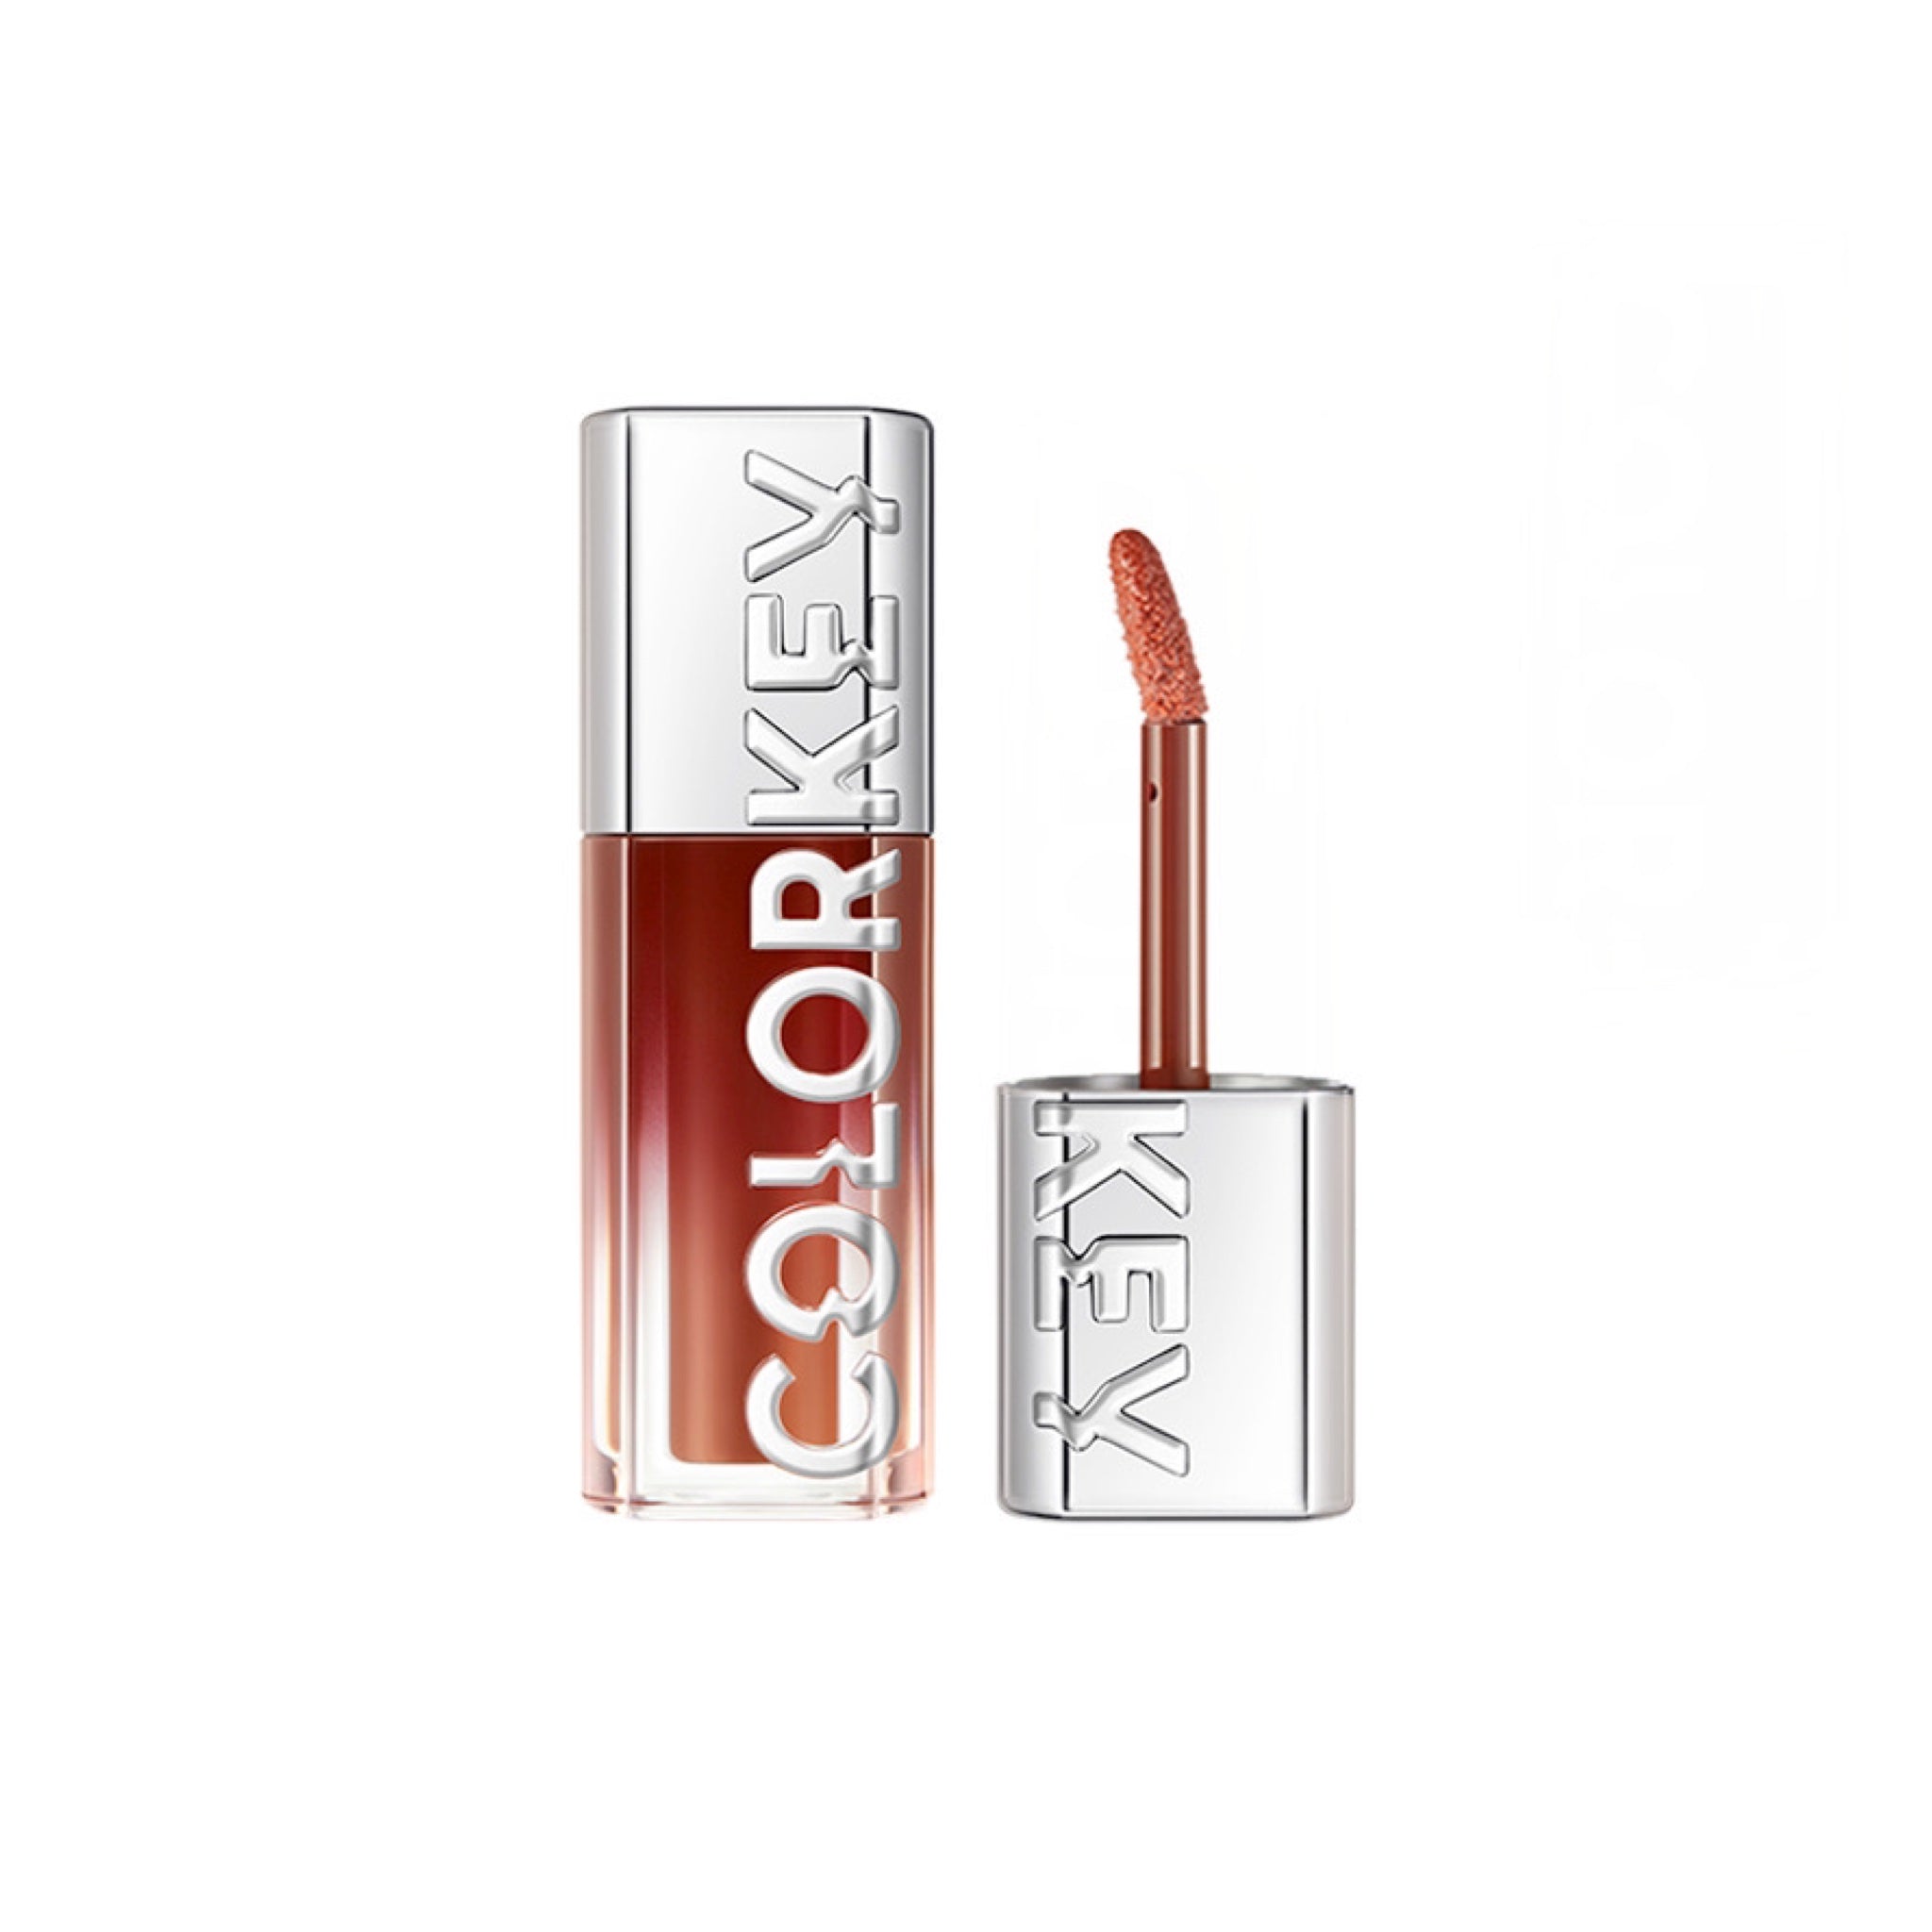 Colorkey Light and Shadow Lip Stain KLQ112